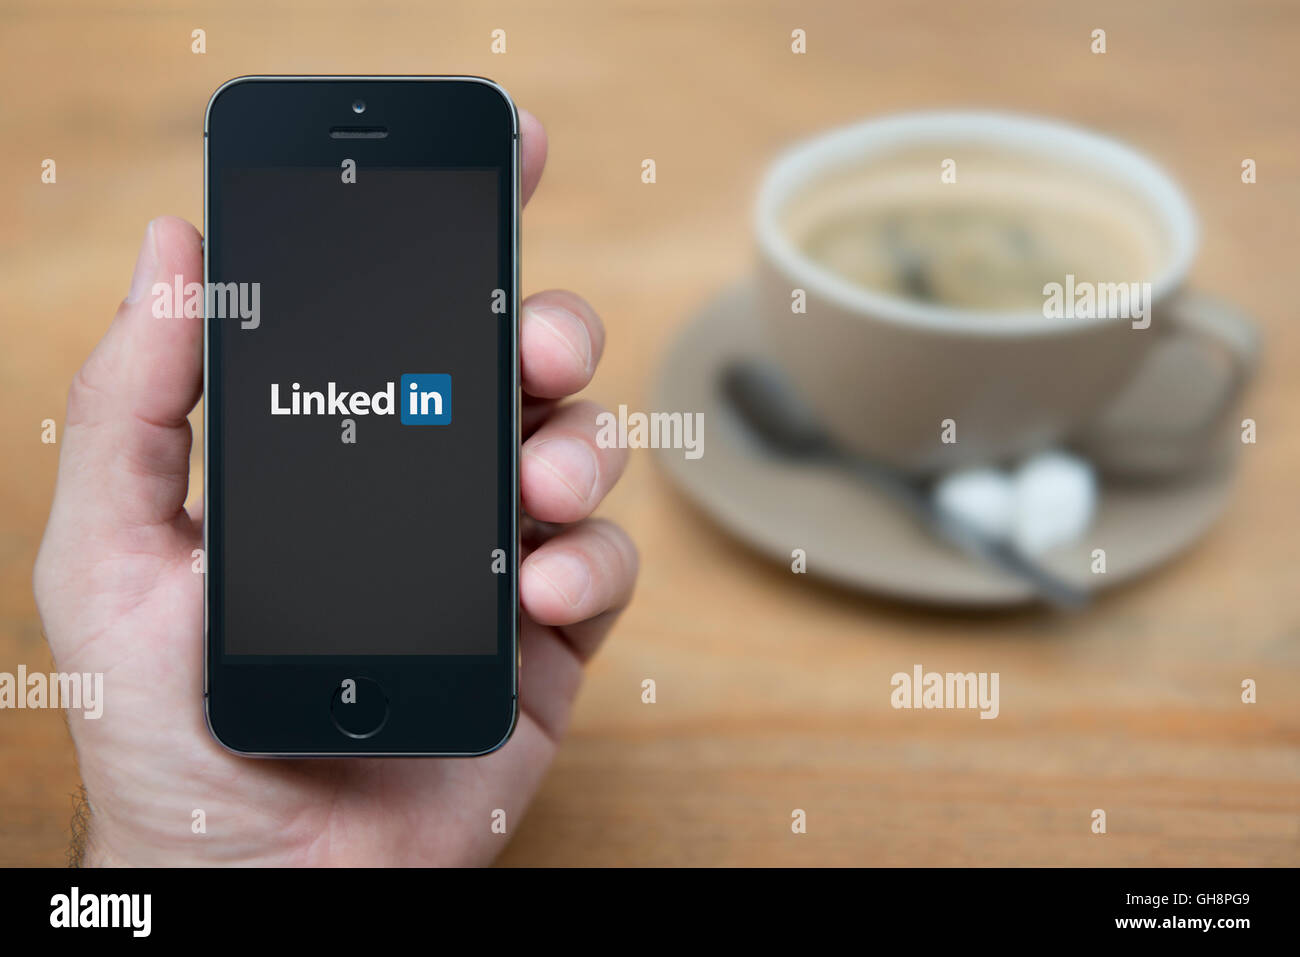 A man looks at his iPhone which displays the Linkedin logo, while sat with a cup of coffee (Editorial use only). Stock Photo